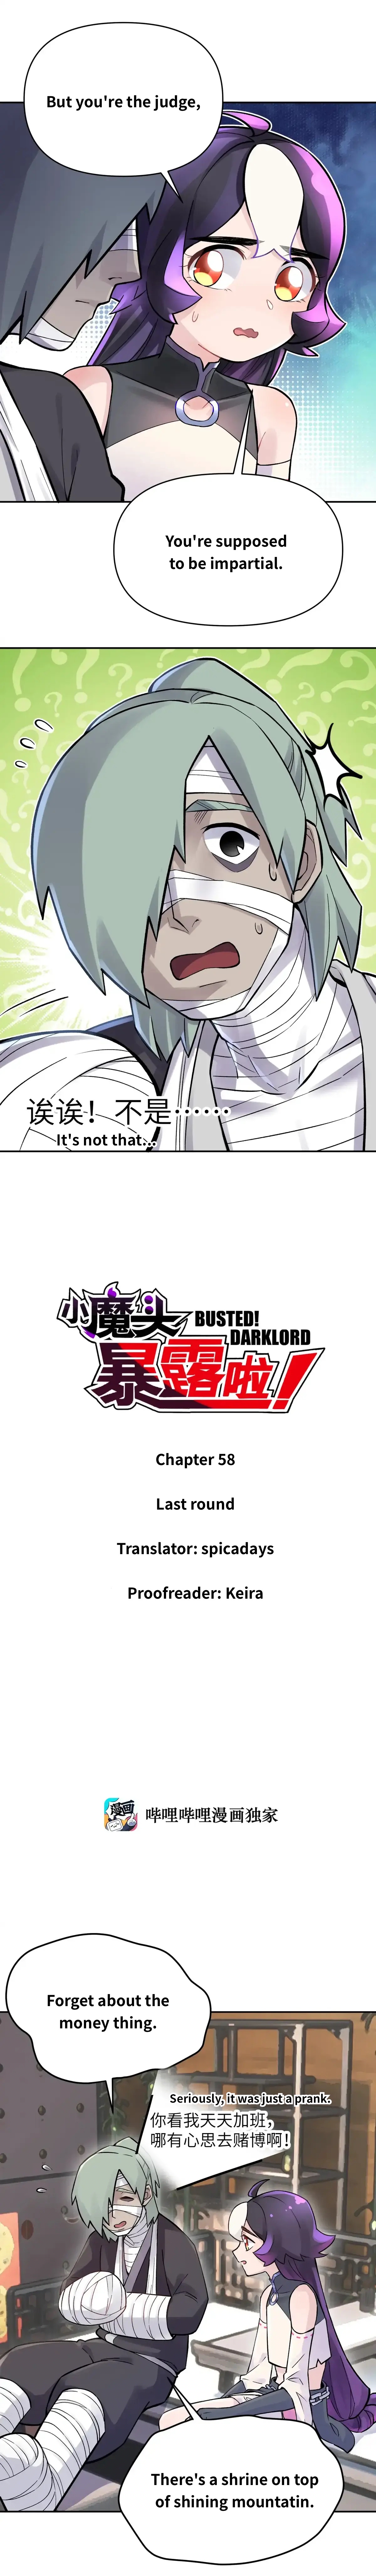 Busted! Darklord Chapter 58: Final Round - Picture 1